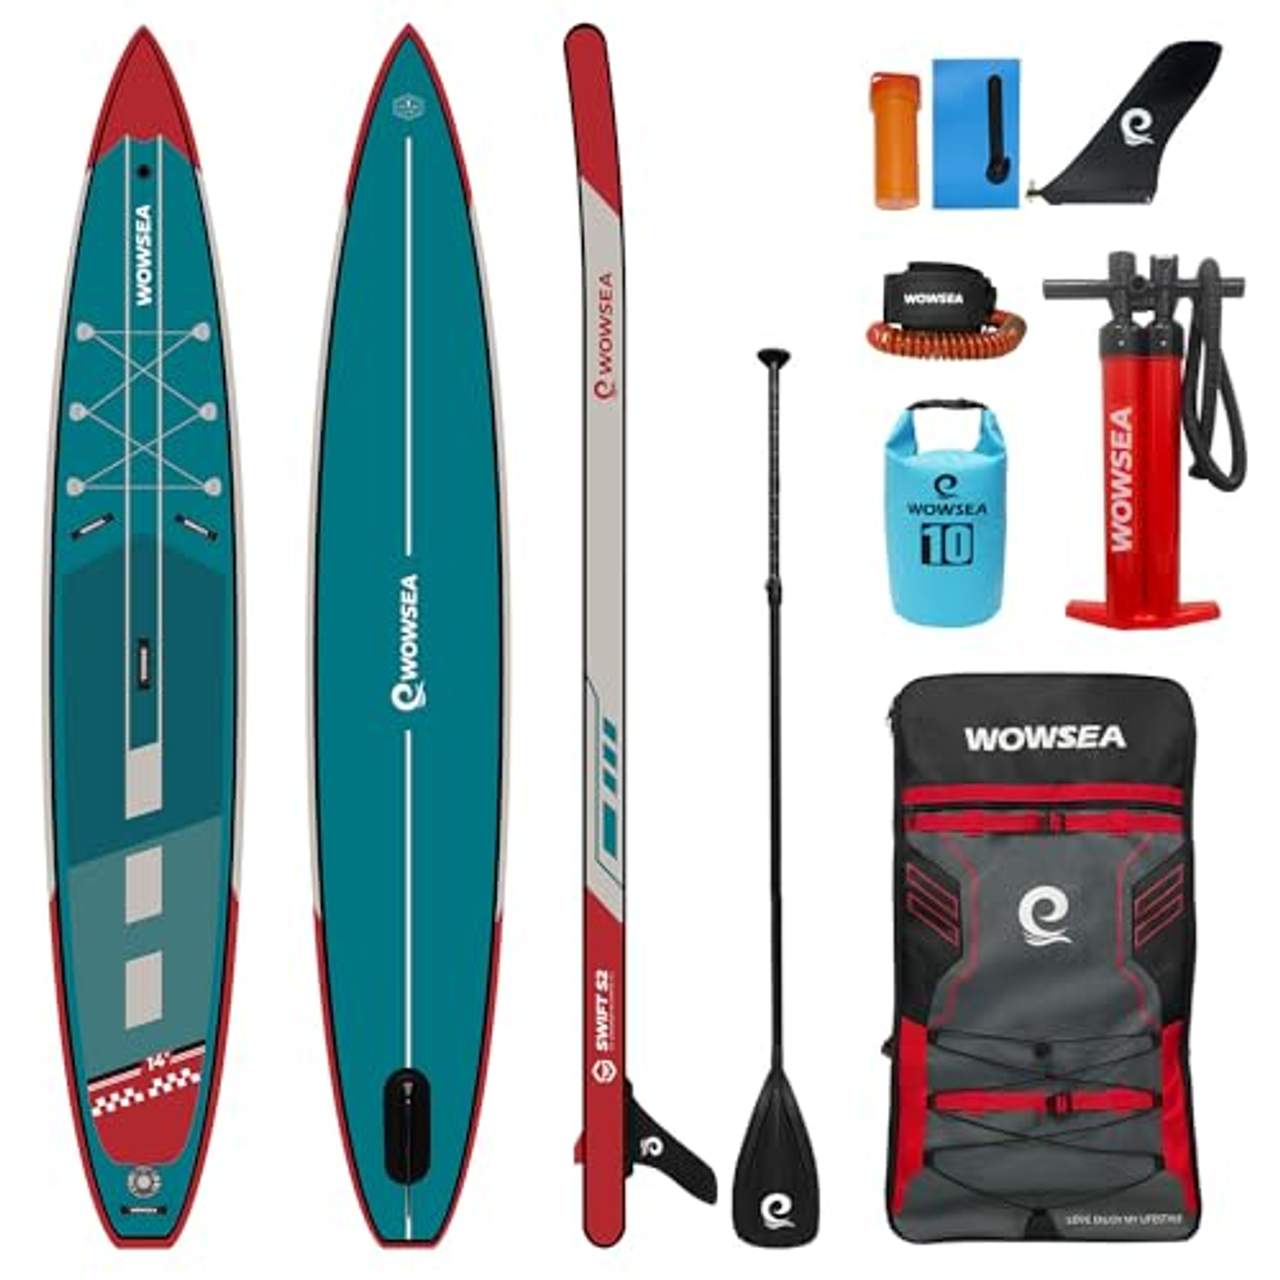 WOWSEA Swift S2 Aufblasbares Stand Up Paddle Board